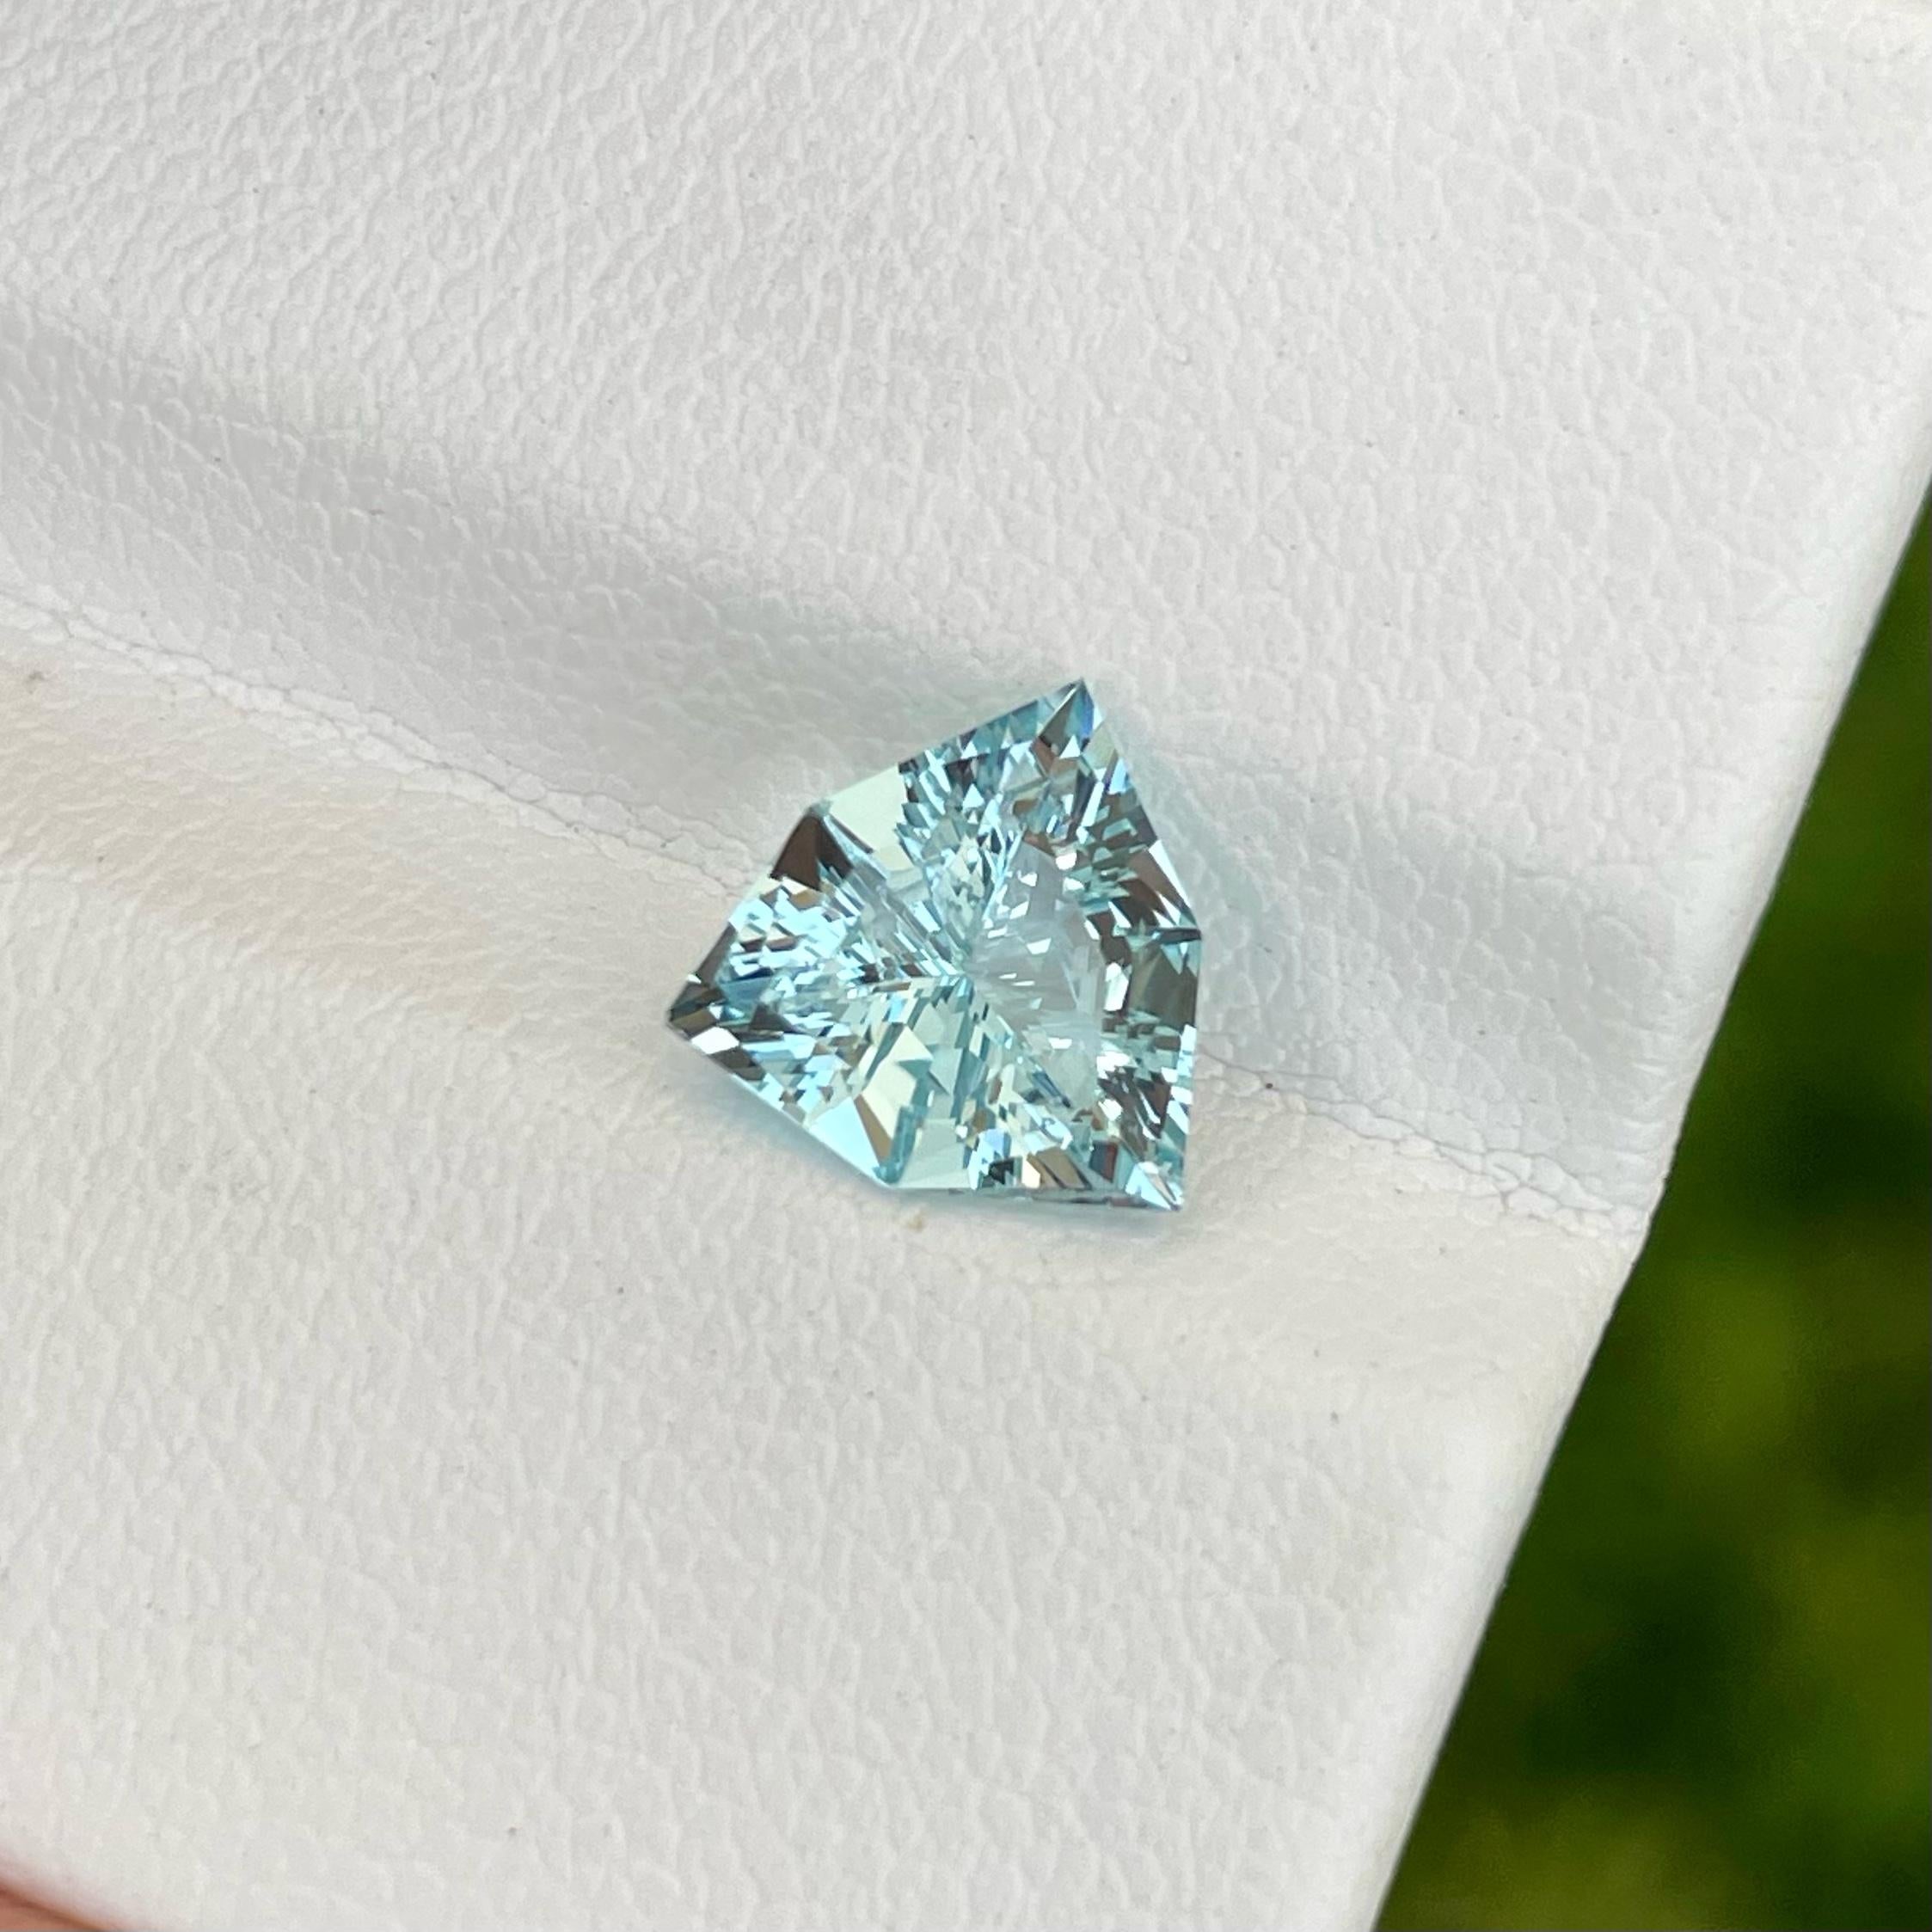 Weight 1.65 carats 
Dimensions 9.2x9.2x4.7 mm
Treatment none 
Origin Pakistan 
Clarity Loupe clean 
Shape Triangular 
Cut Trilliant 

Perfect for any occasion, the Deep Sea Blue Aquamarine gemstone adds a touch of elegance and sophistication to any